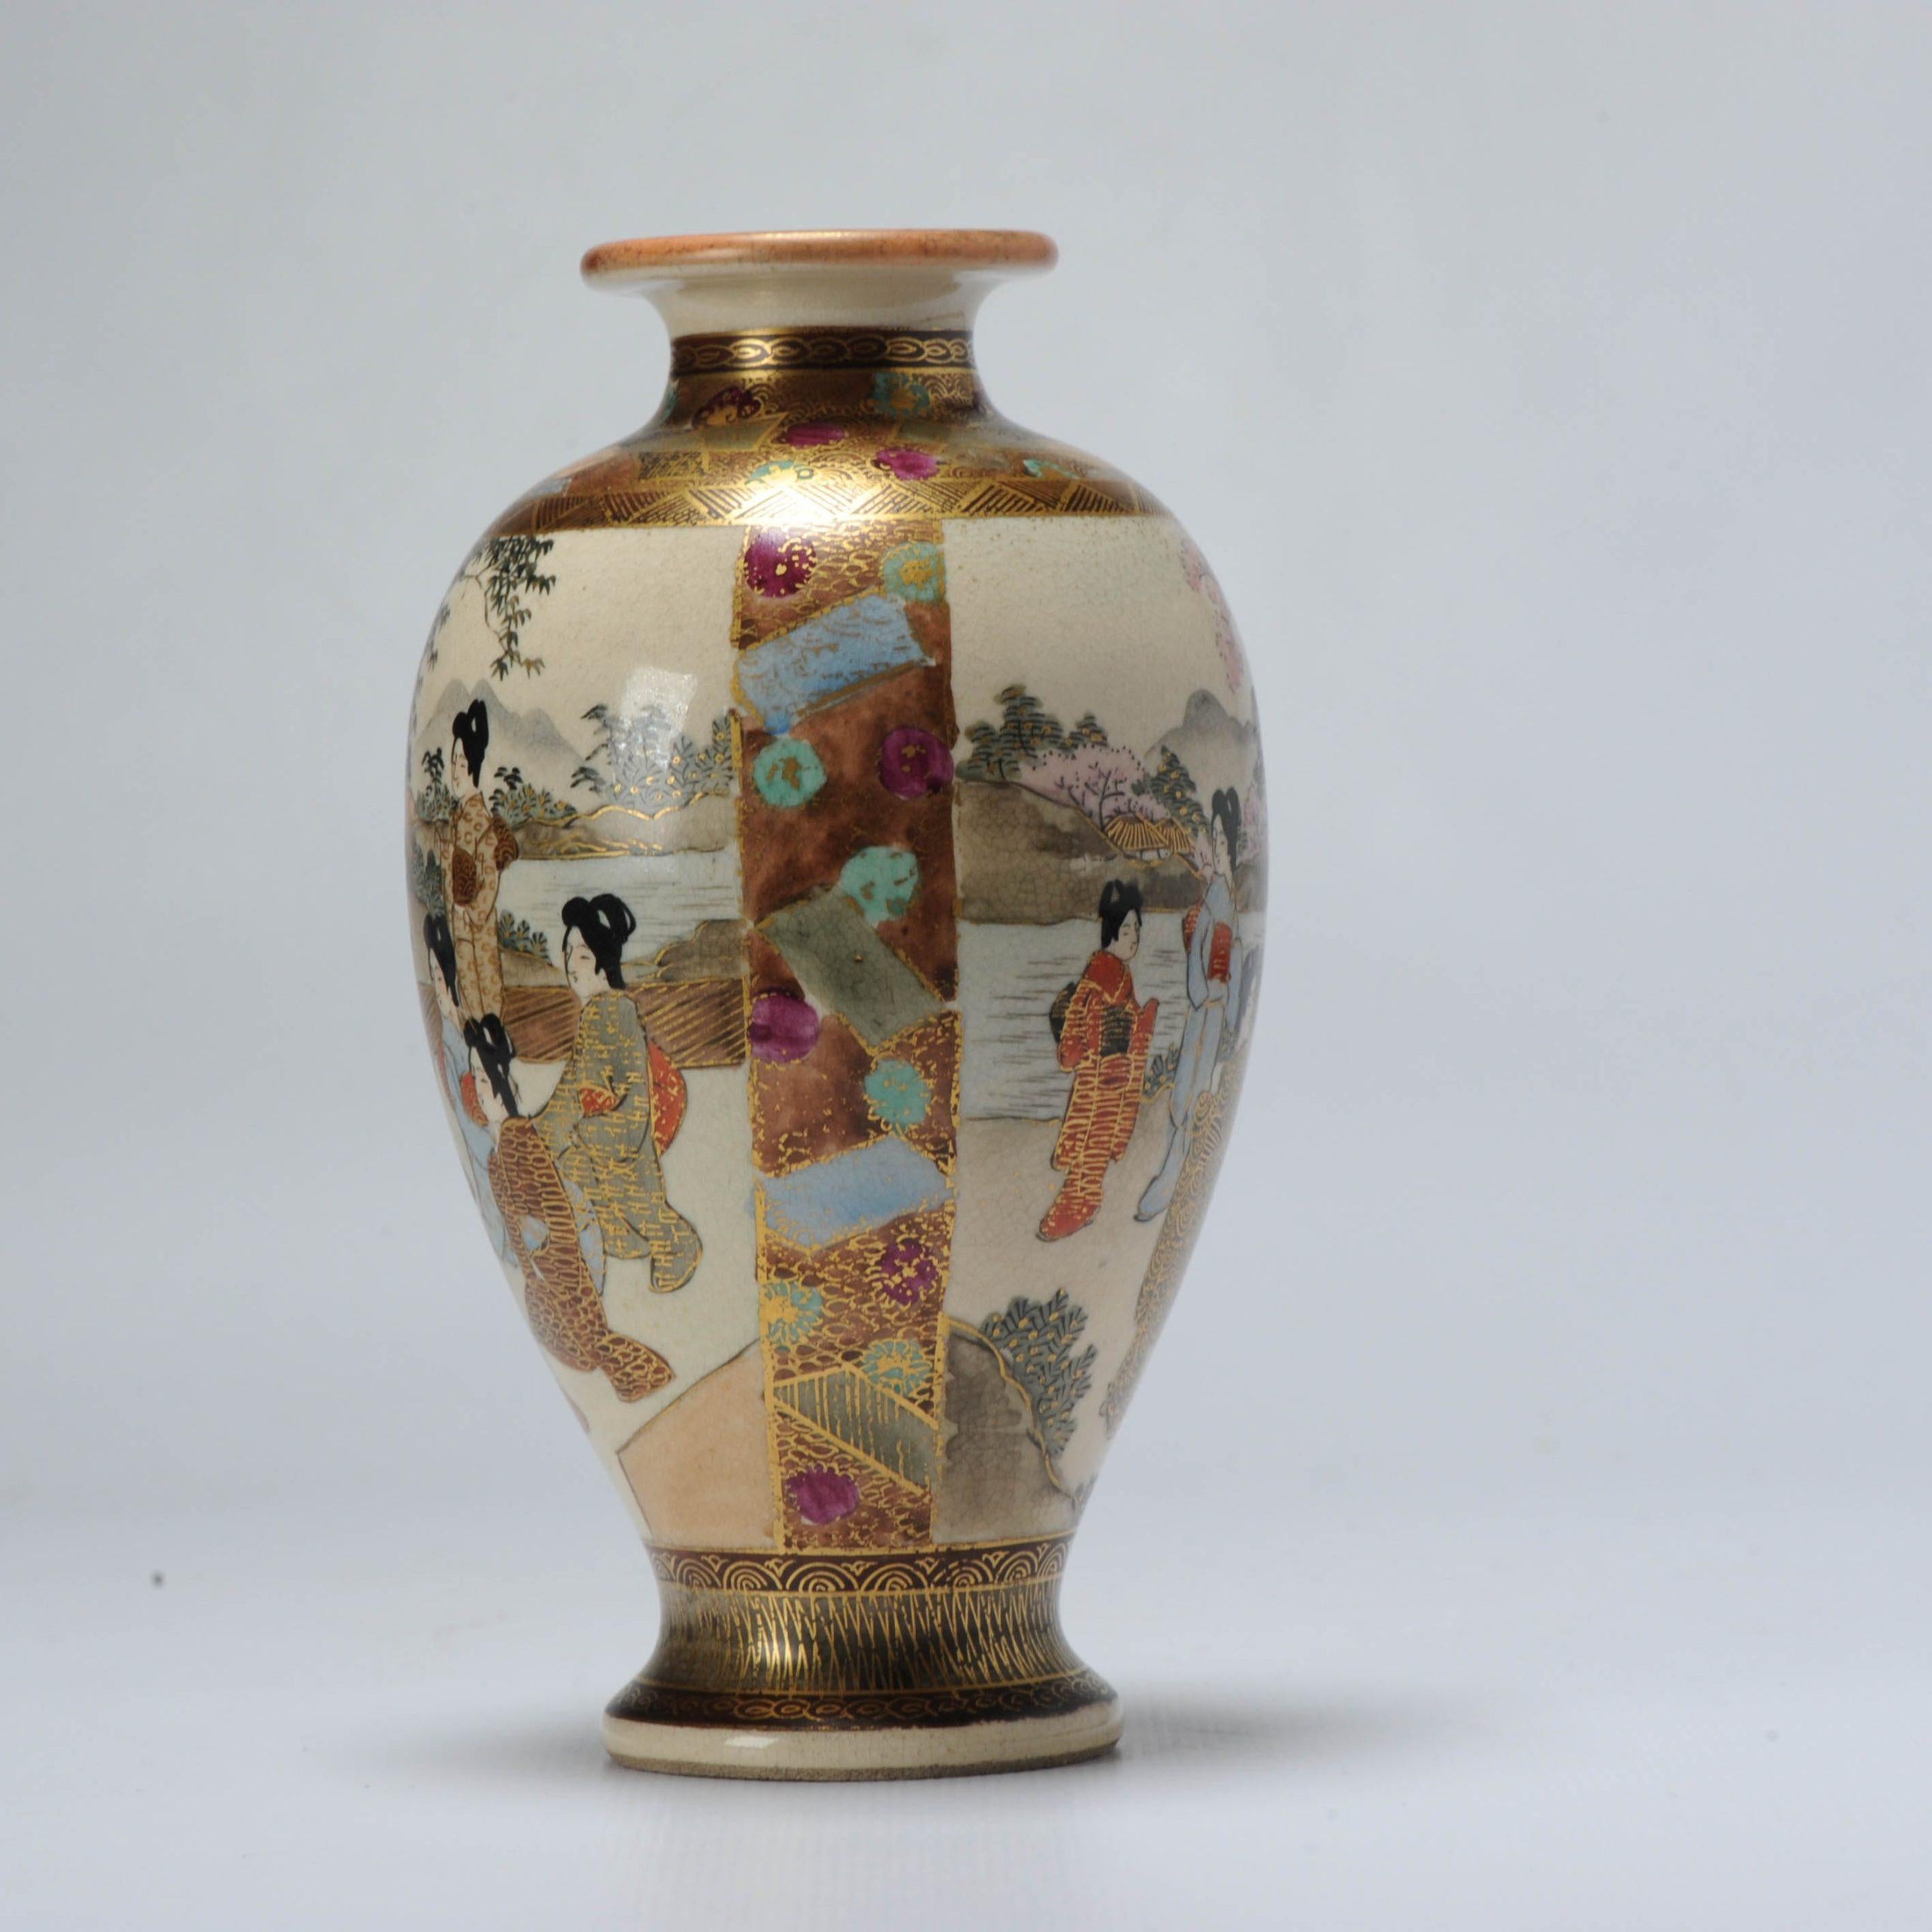 A lovely Satsuma vase with Geishas/Elegant ladies in a landscape/pagode scene. Marked base.

Additional information:
Material: Porcelain & Pottery
Japanese Style: Satsuma
Region of Origin: Japan
Period: 19th century Meiji Periode (1867-1912)
Age: